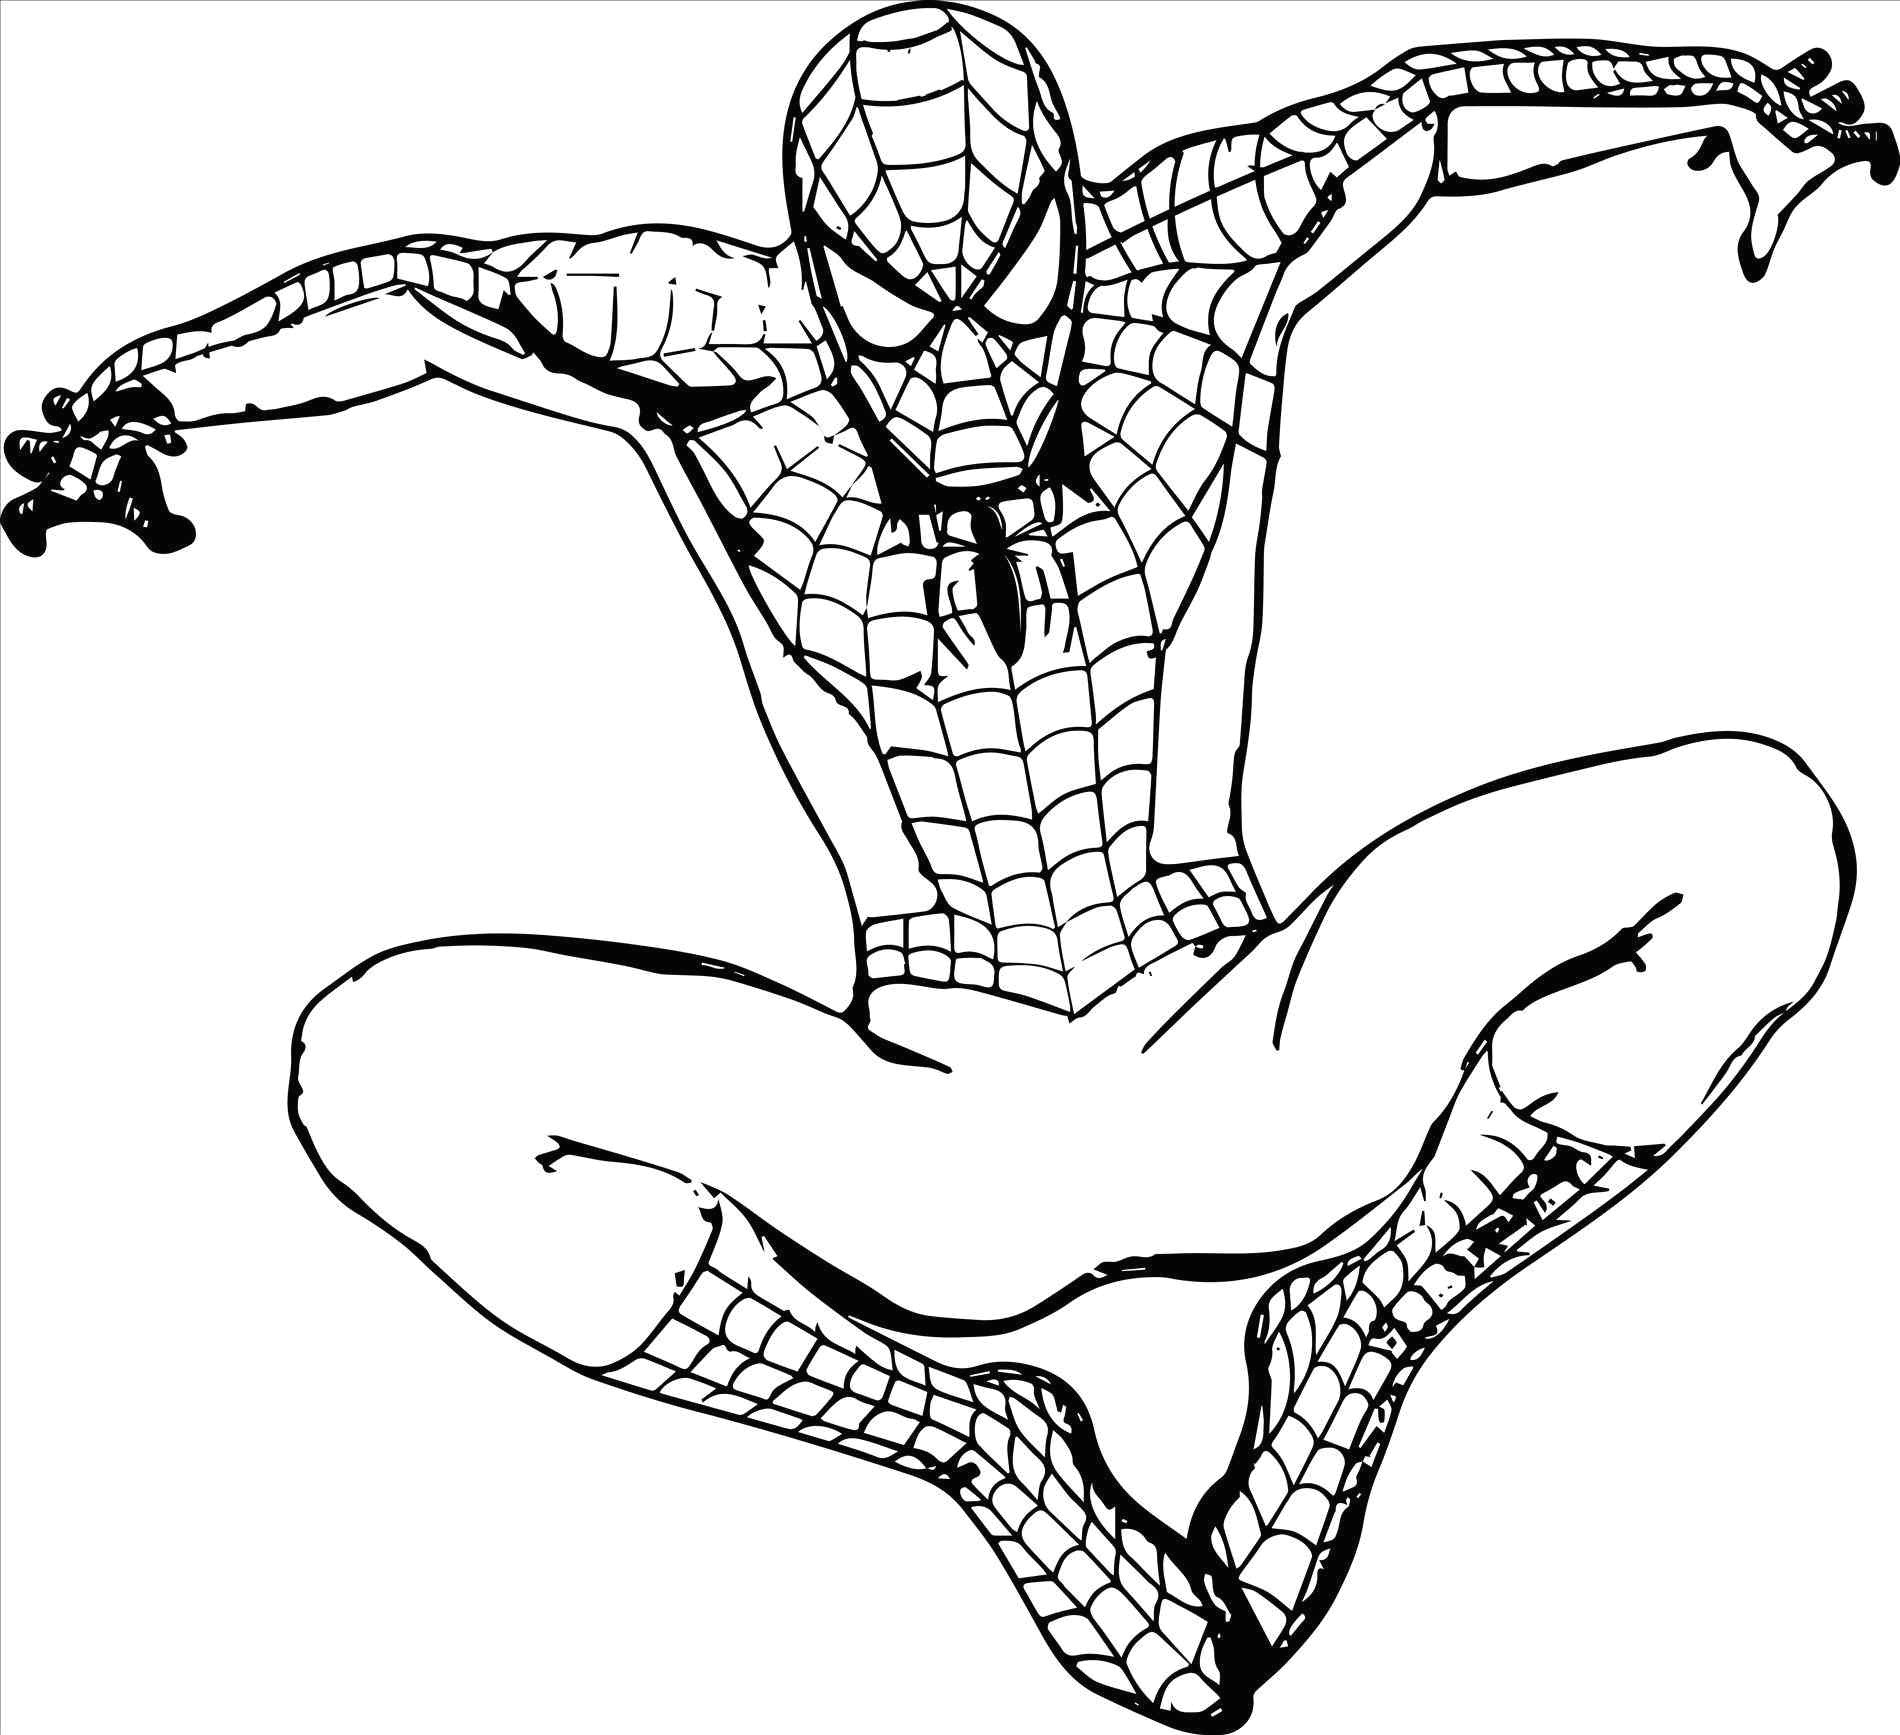 Easy Drawings Of X-men Spiderman Coloring Pages to Print Luxury Superheroes Easy to Draw